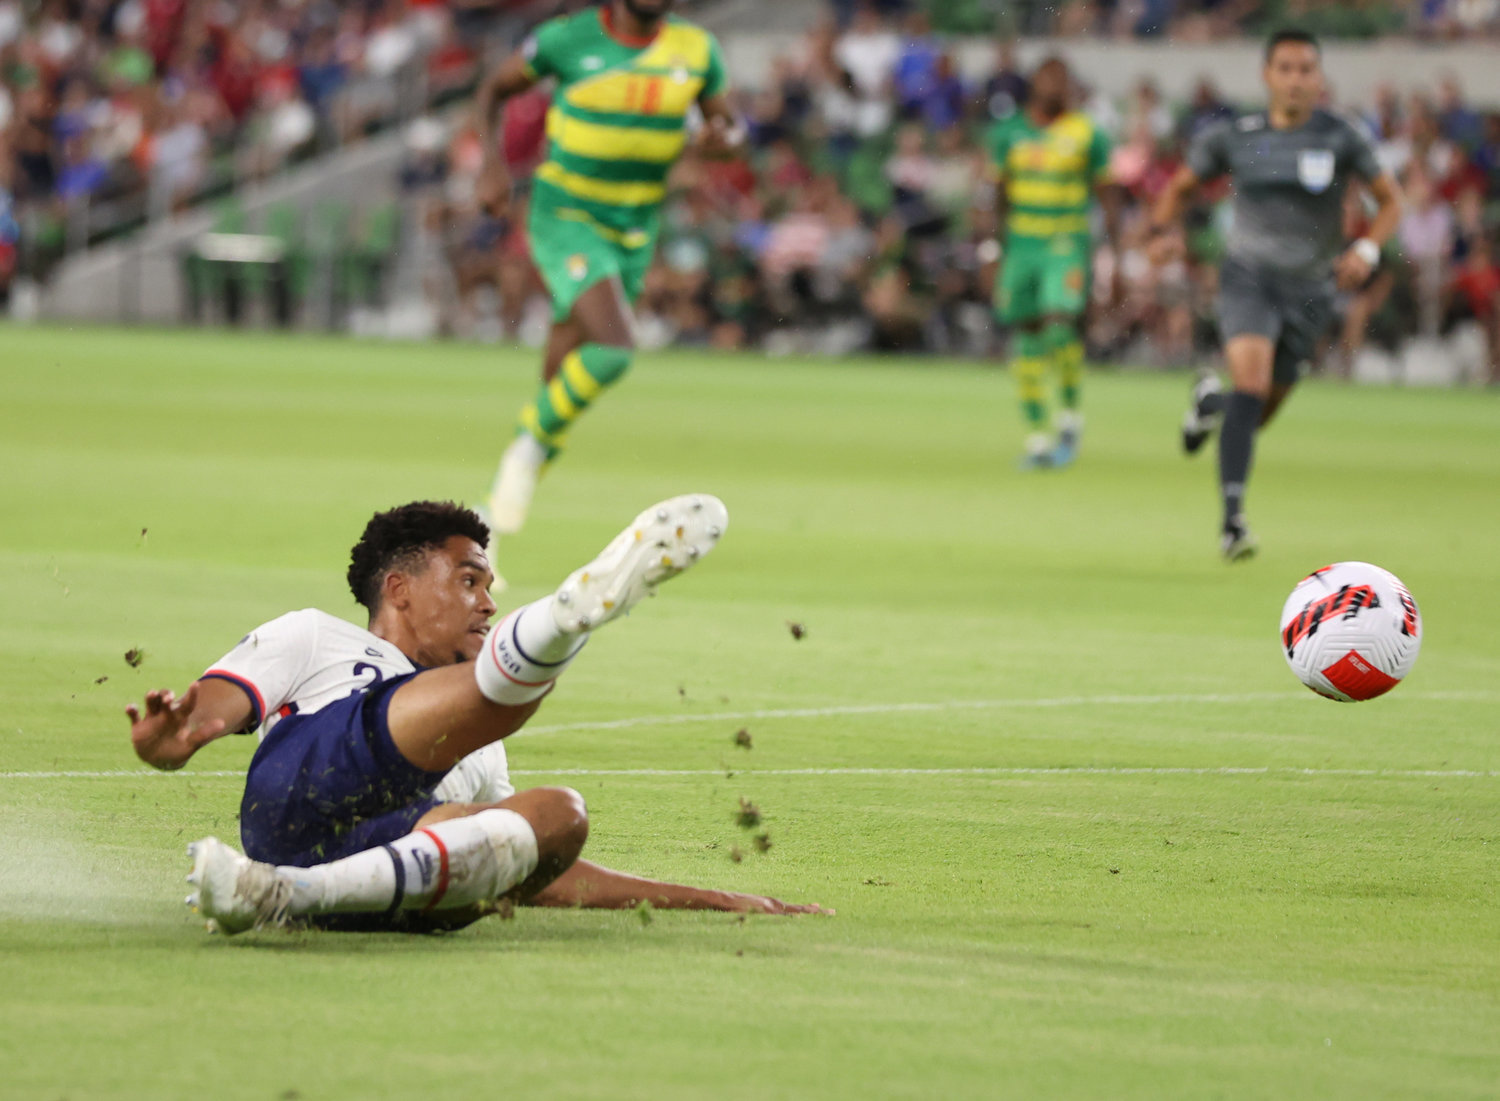 United States defender Reggie Cannon (22) makes a sliding shot during a Concacaf Nations League match on June 10, 2022 in Austin, Texas.